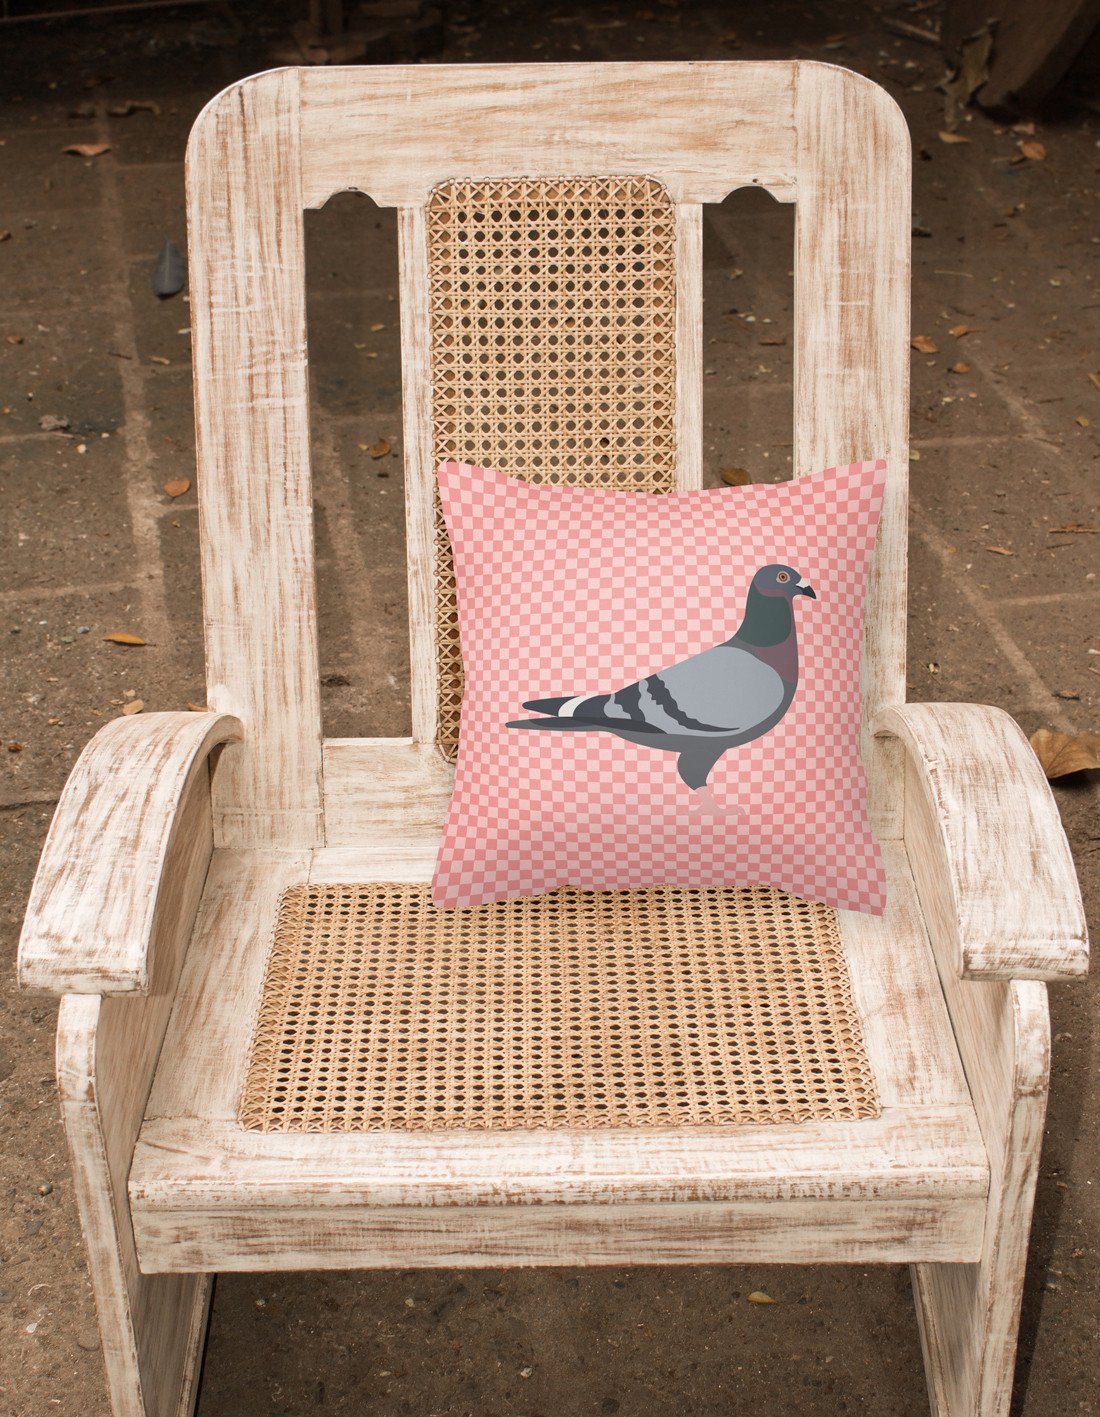 Racing Pigeon Pink Check Fabric Decorative Pillow BB7951PW1818 by Caroline's Treasures